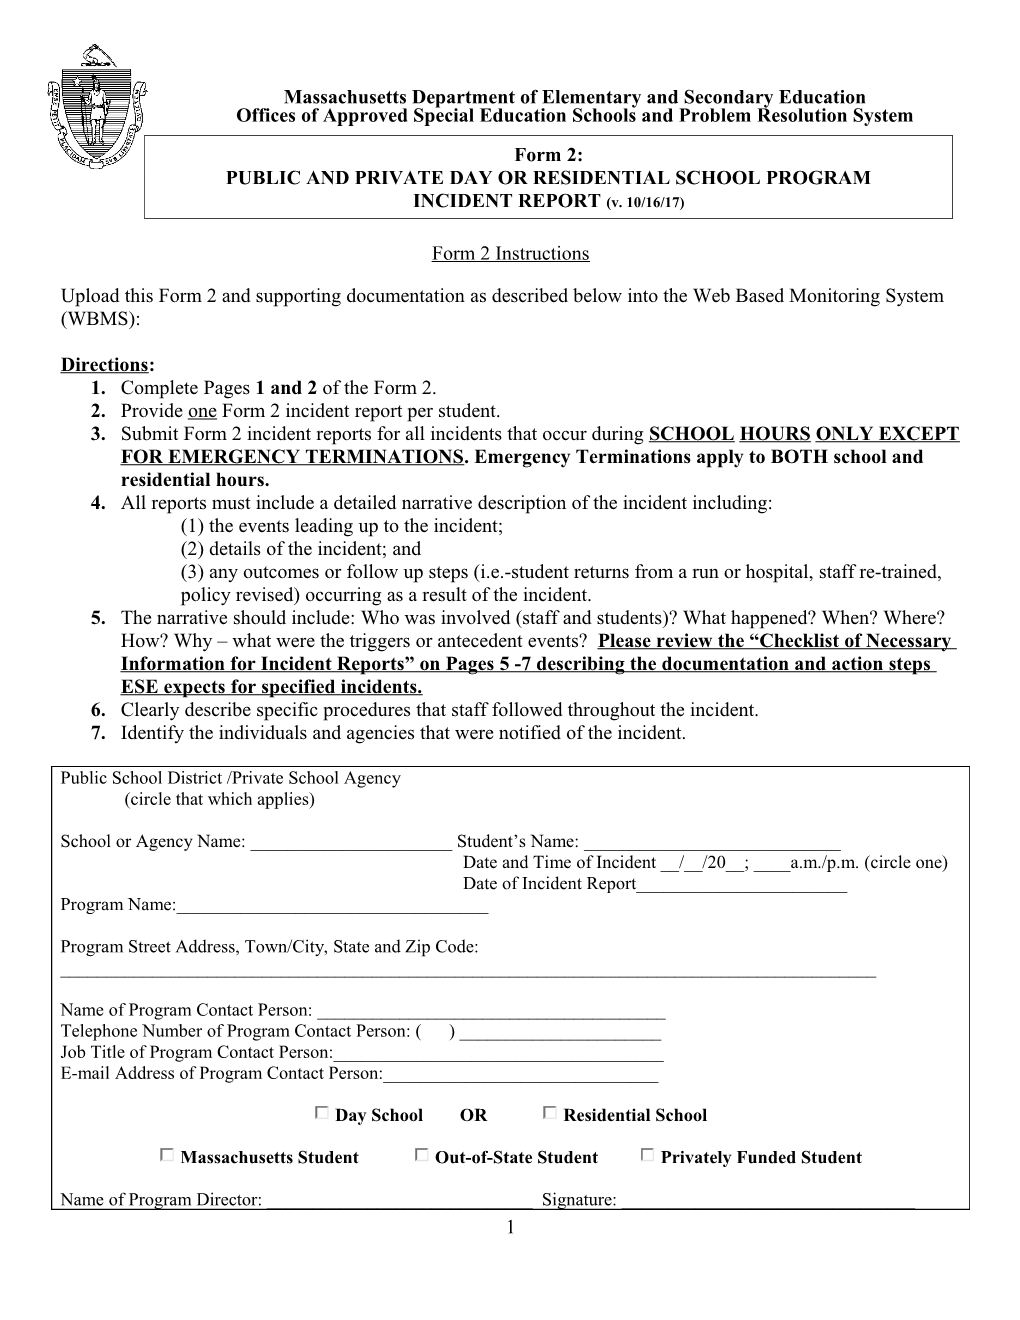 Form 2 Public and Private Day Or Residential School Incident Report